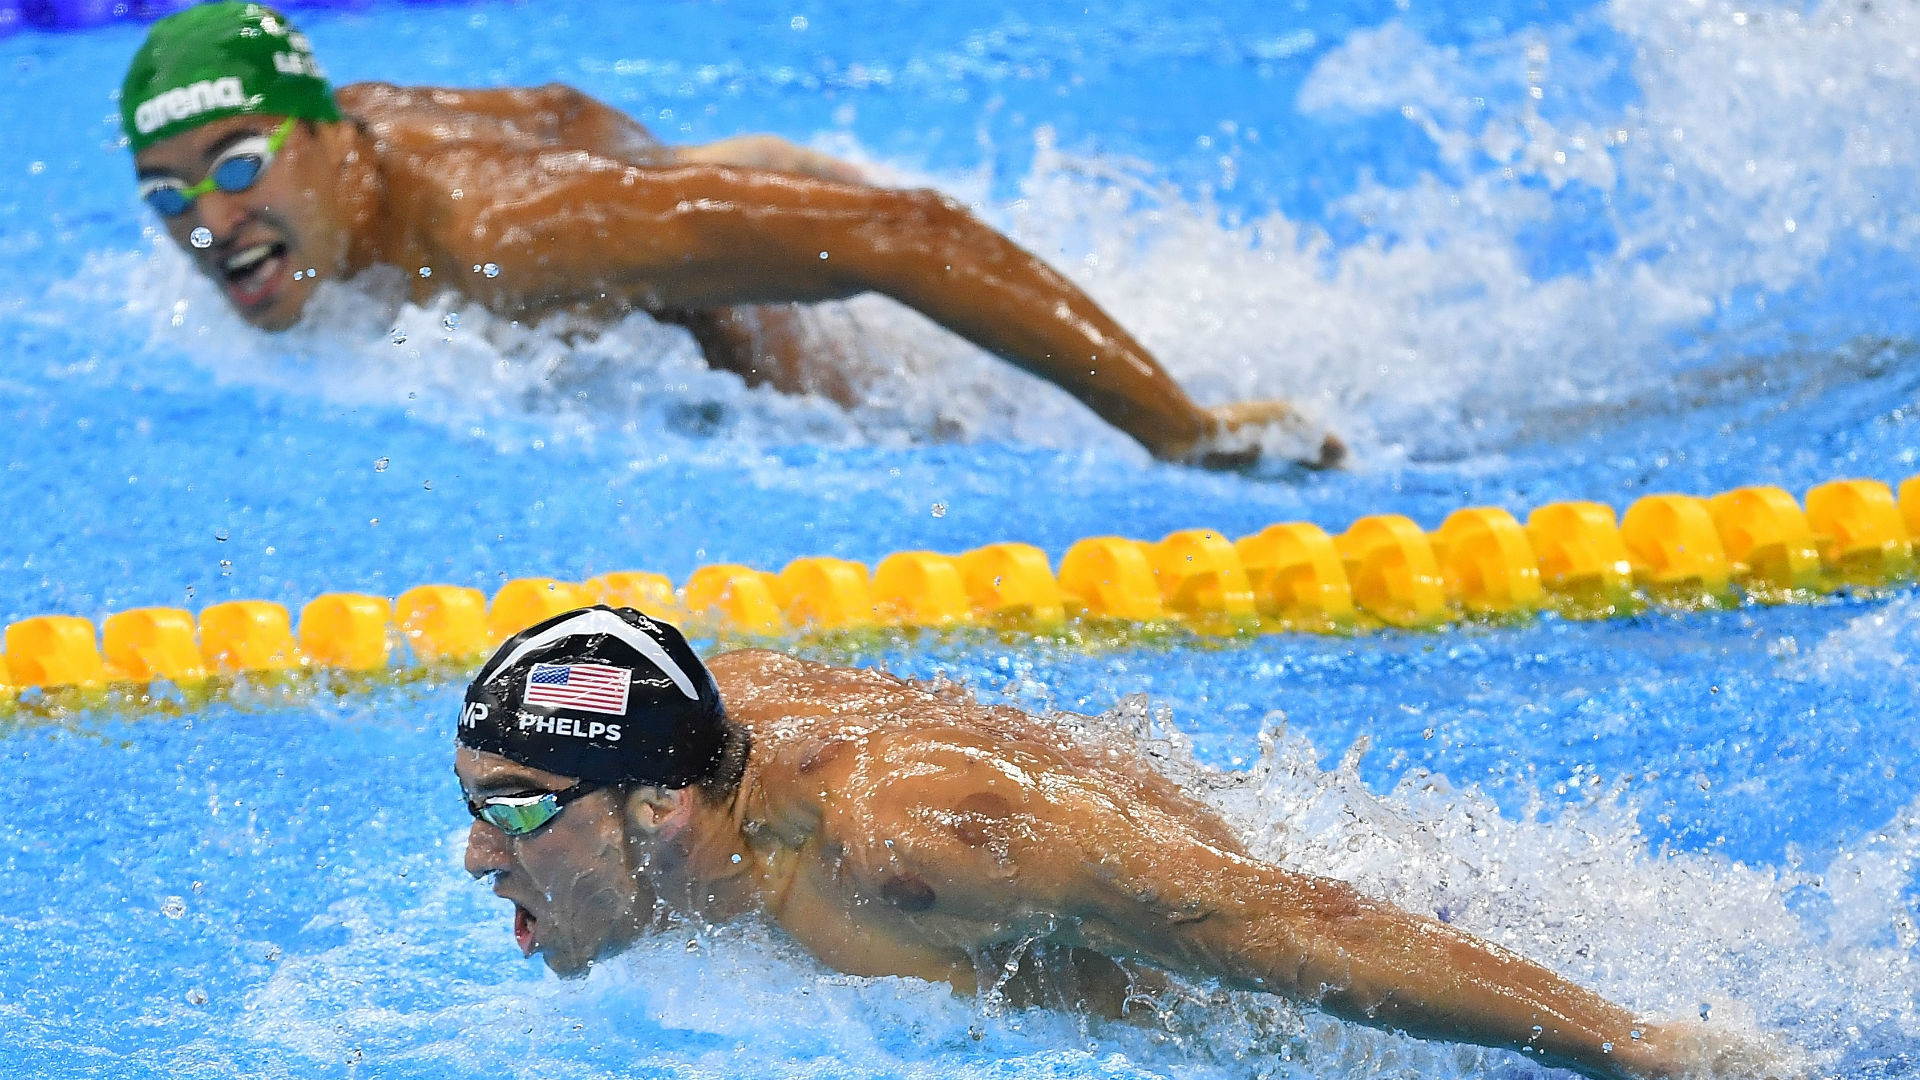 1920x1080 Rio Olympics 2016: Michael Phelps reaches 100 butterfly final for another  Chad le Clos showdown